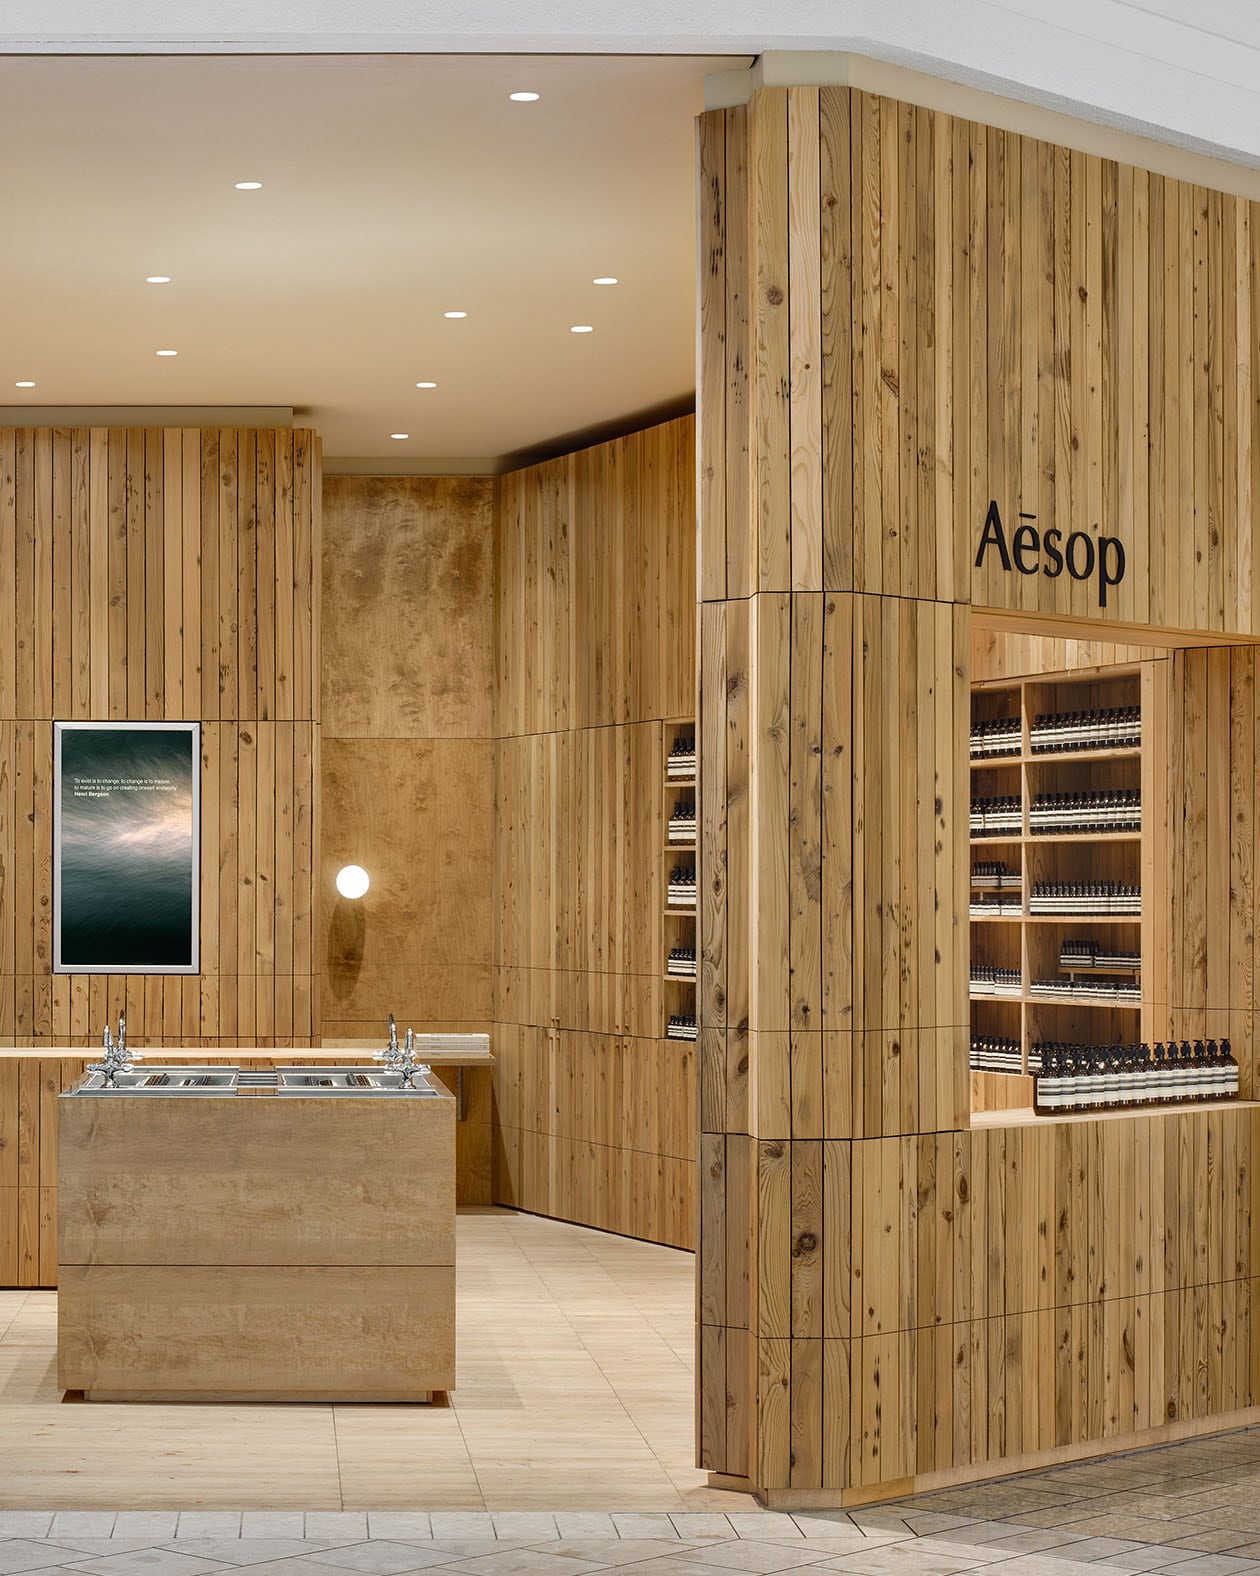 Store front featuring timber wall cladding